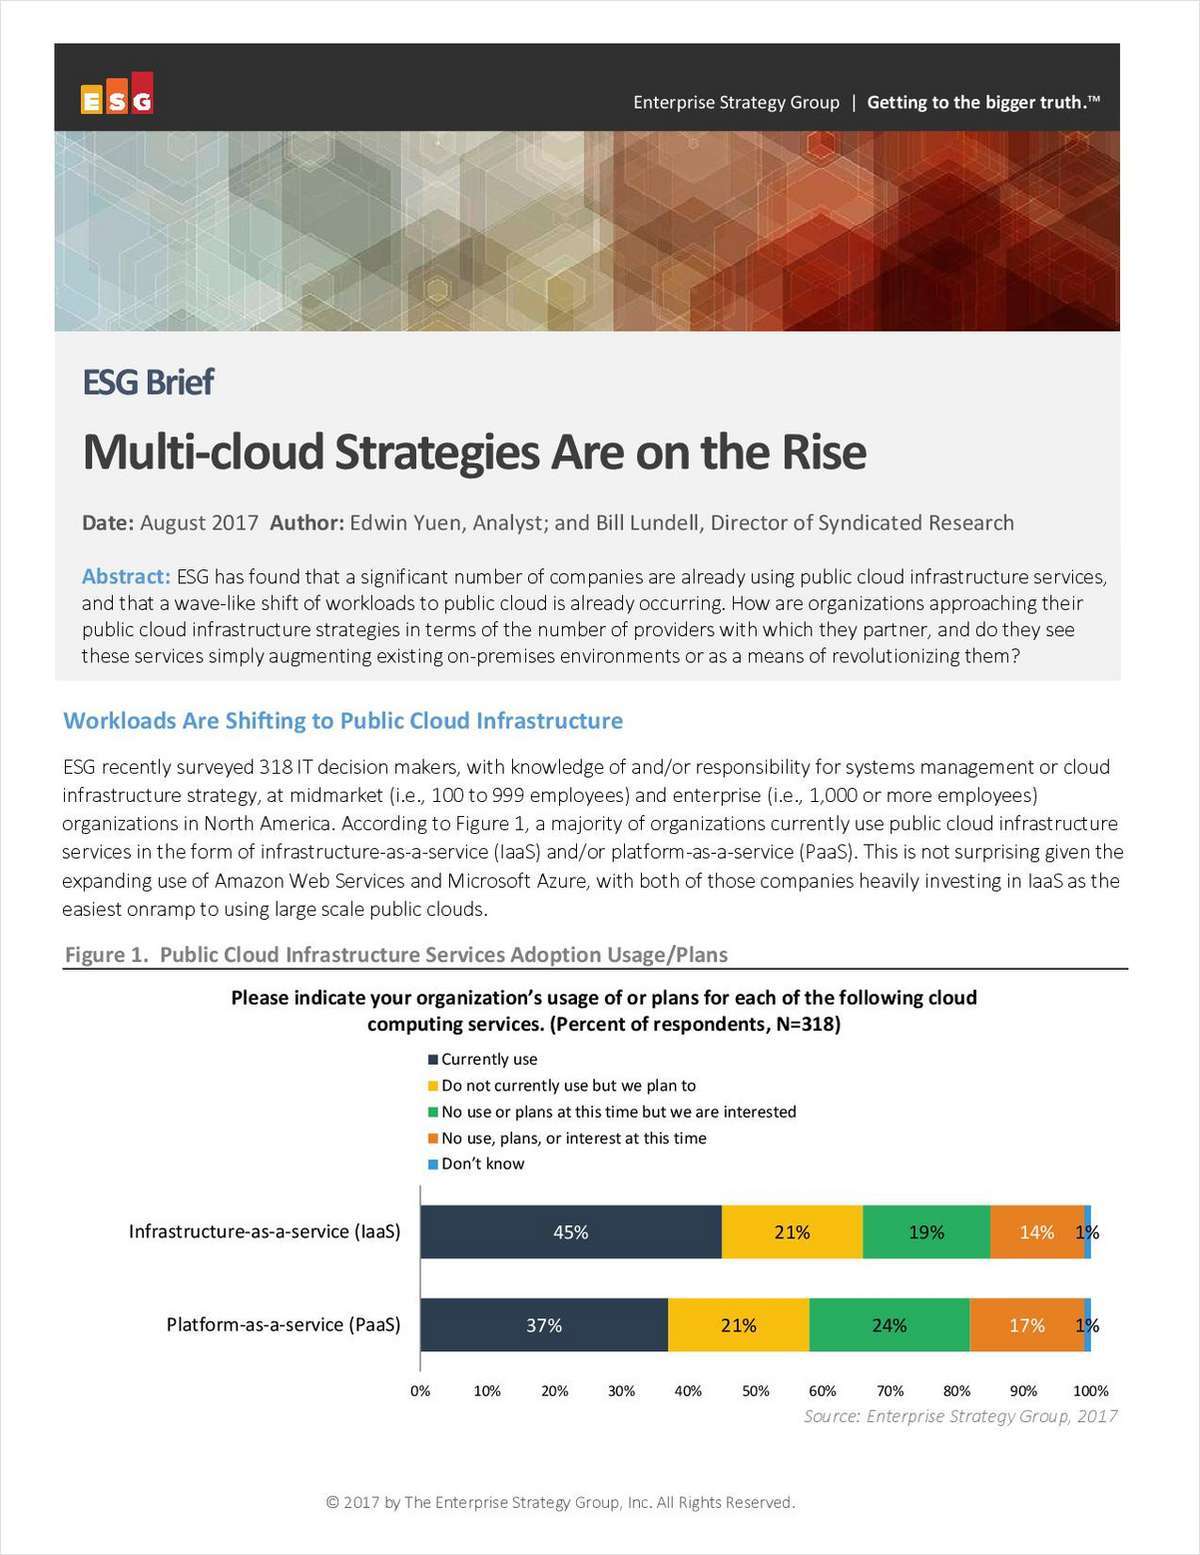 Multi-cloud Strategies Are on the Rise